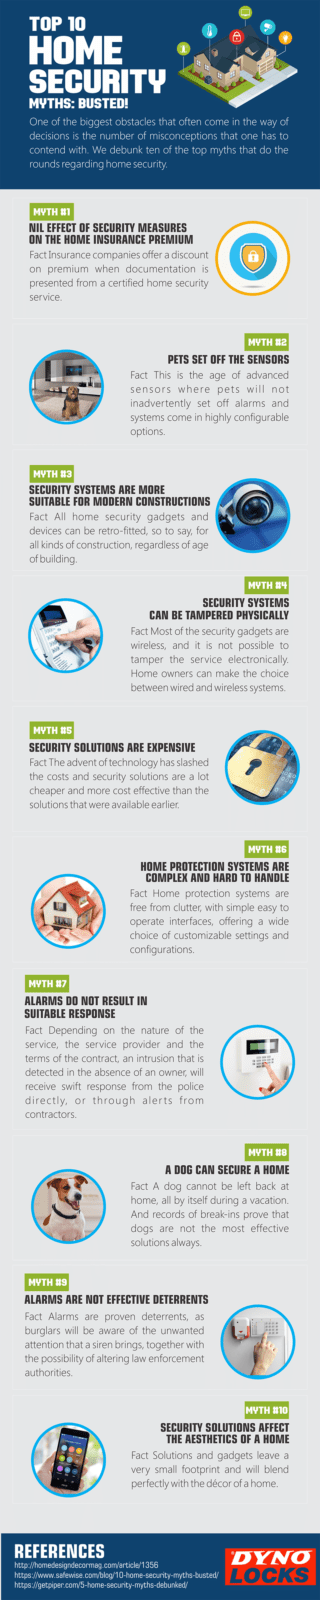 Top 10 Home Security Myths Busted